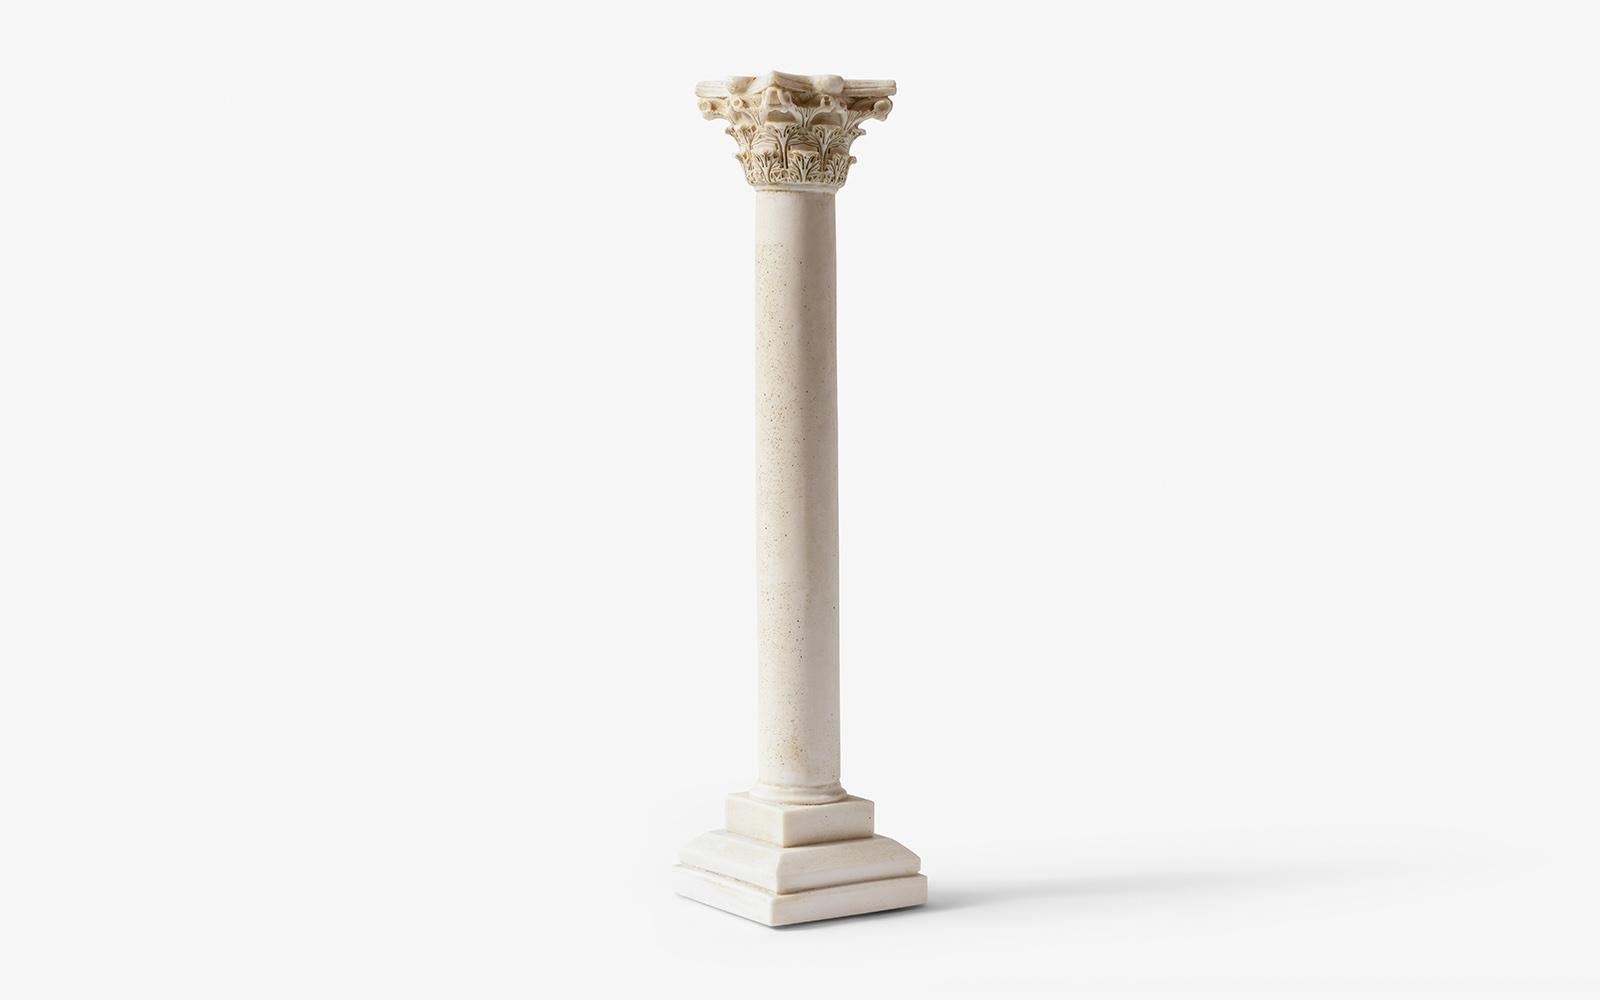 Weight: 2,5 kg

*There are 2 pieces in this set.
-Produced from pressed marble powder.
-Produced from the original molds of the works from the museum.
-Can be used indoors and outdoors.

Columns named after the ancient Greek city of Corinth, BC. It